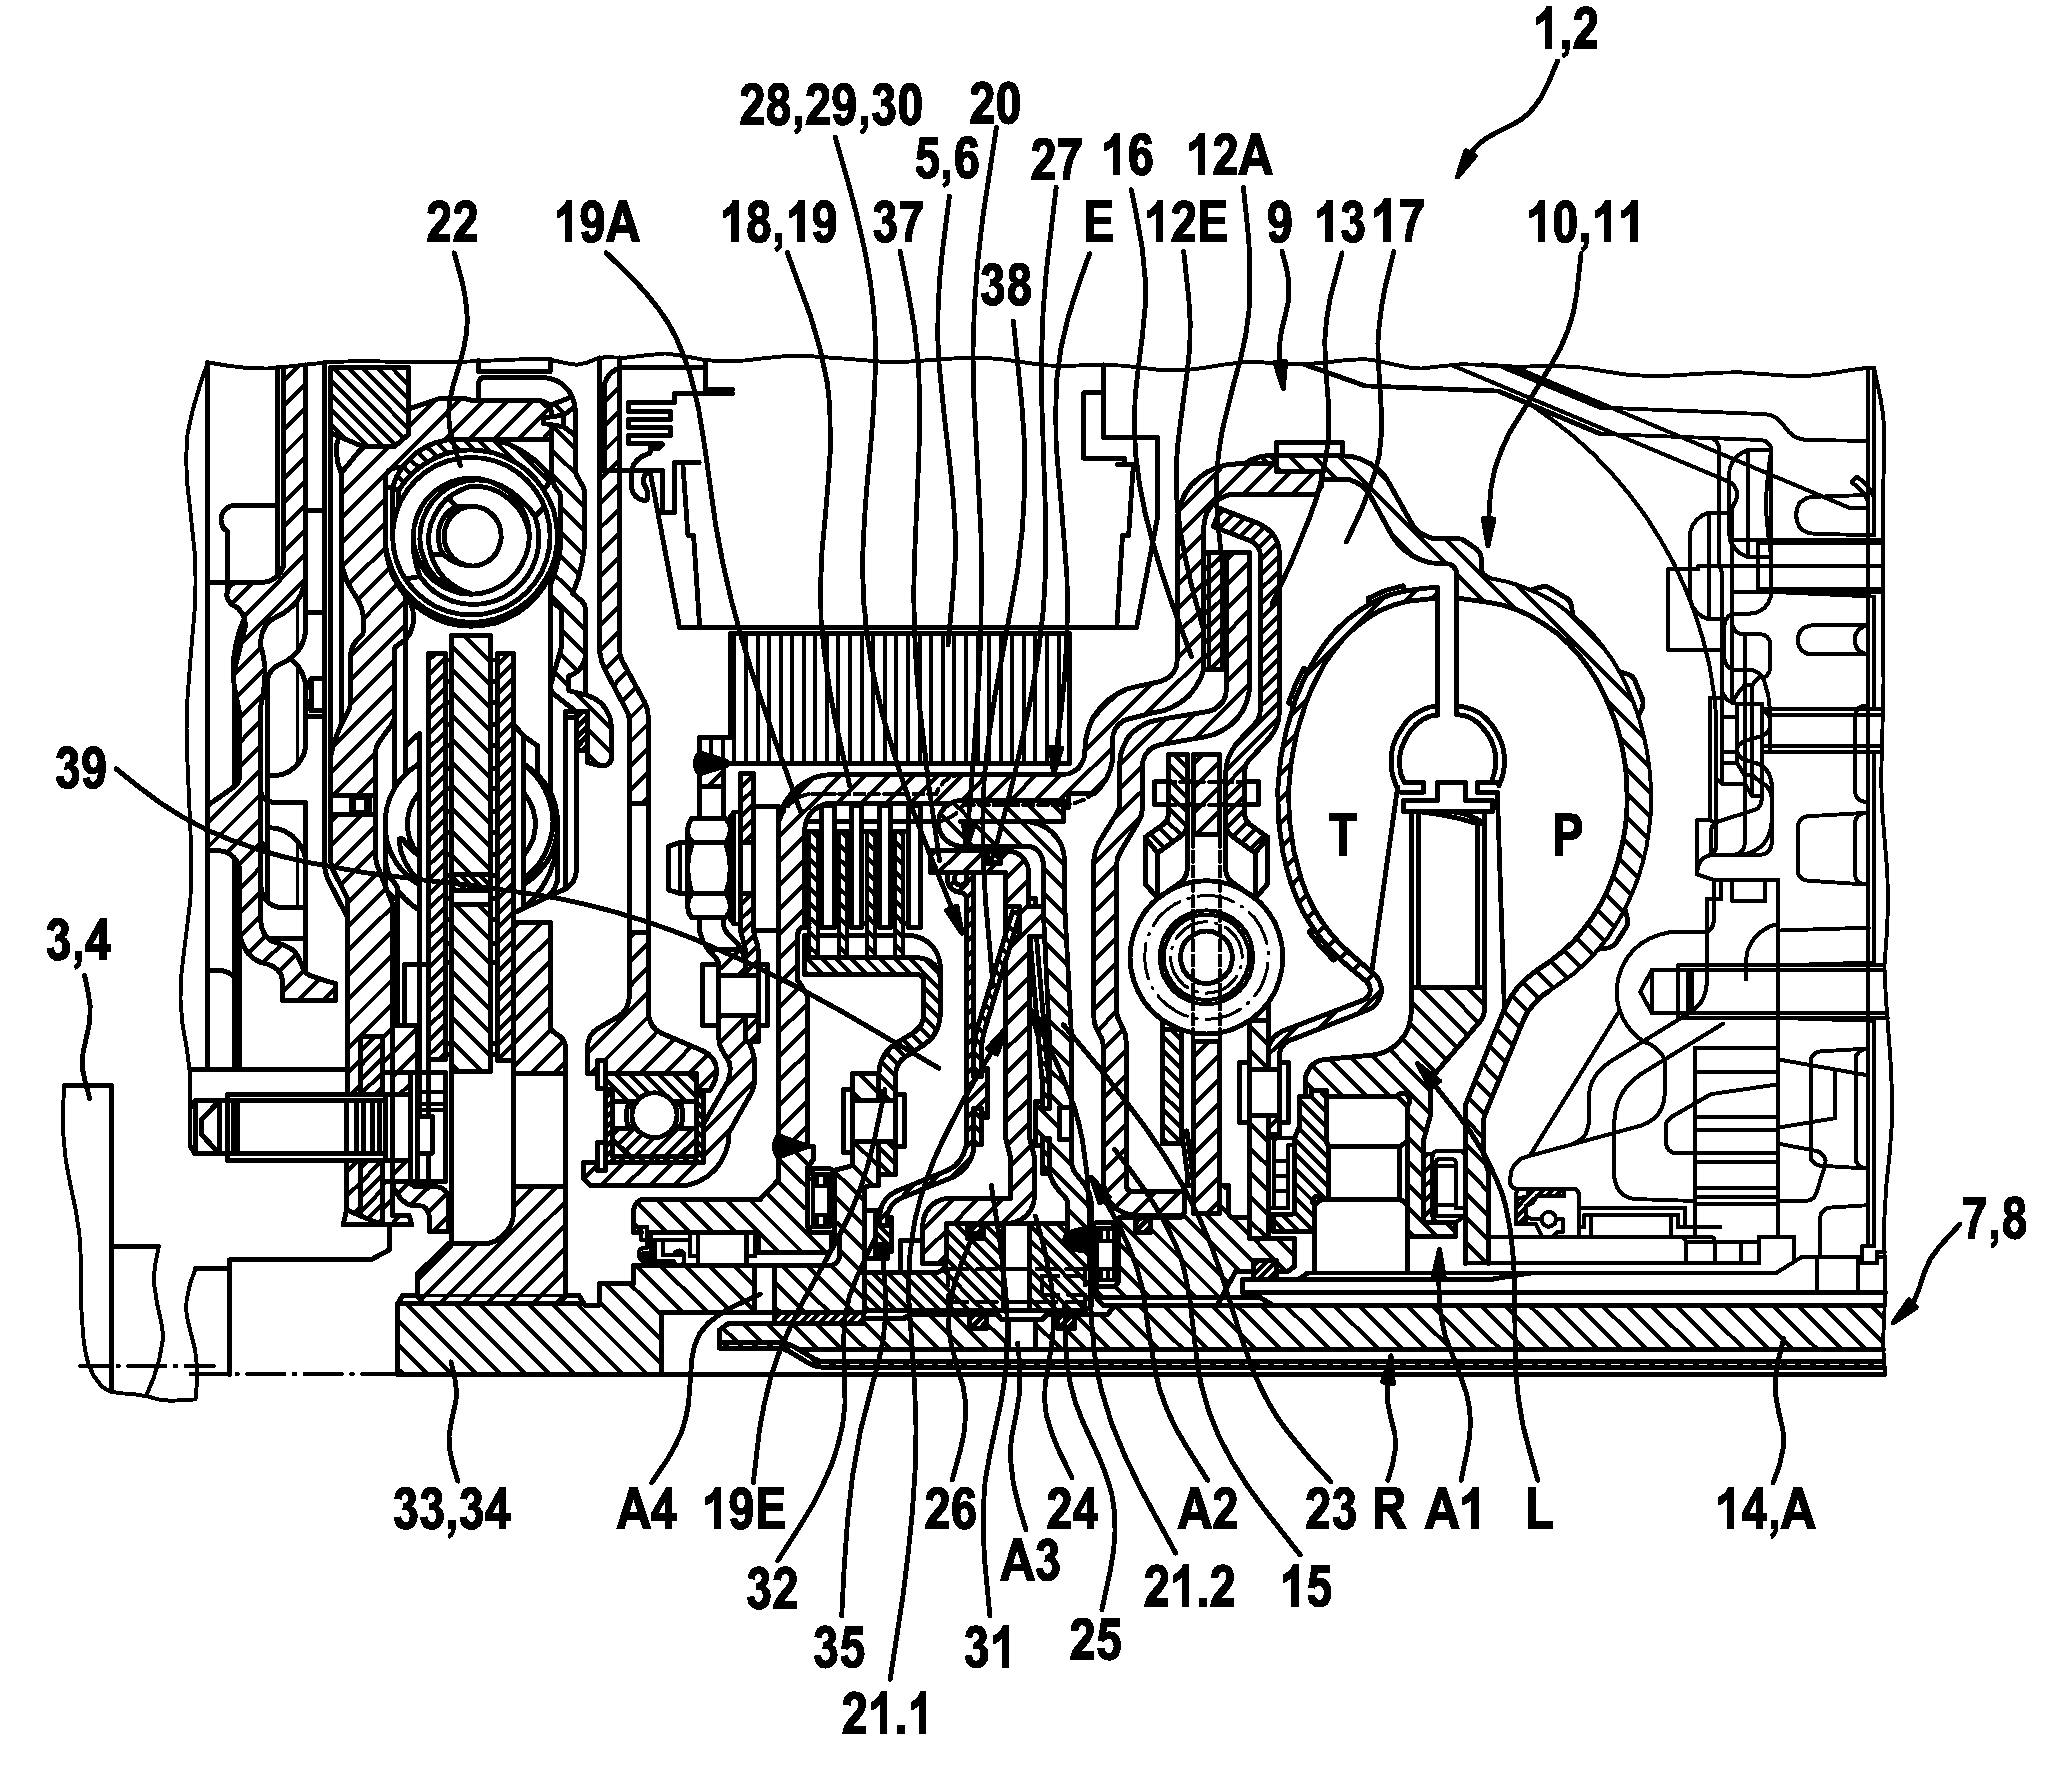 Combined power transmission, drive unit and drive train for a hybrid system